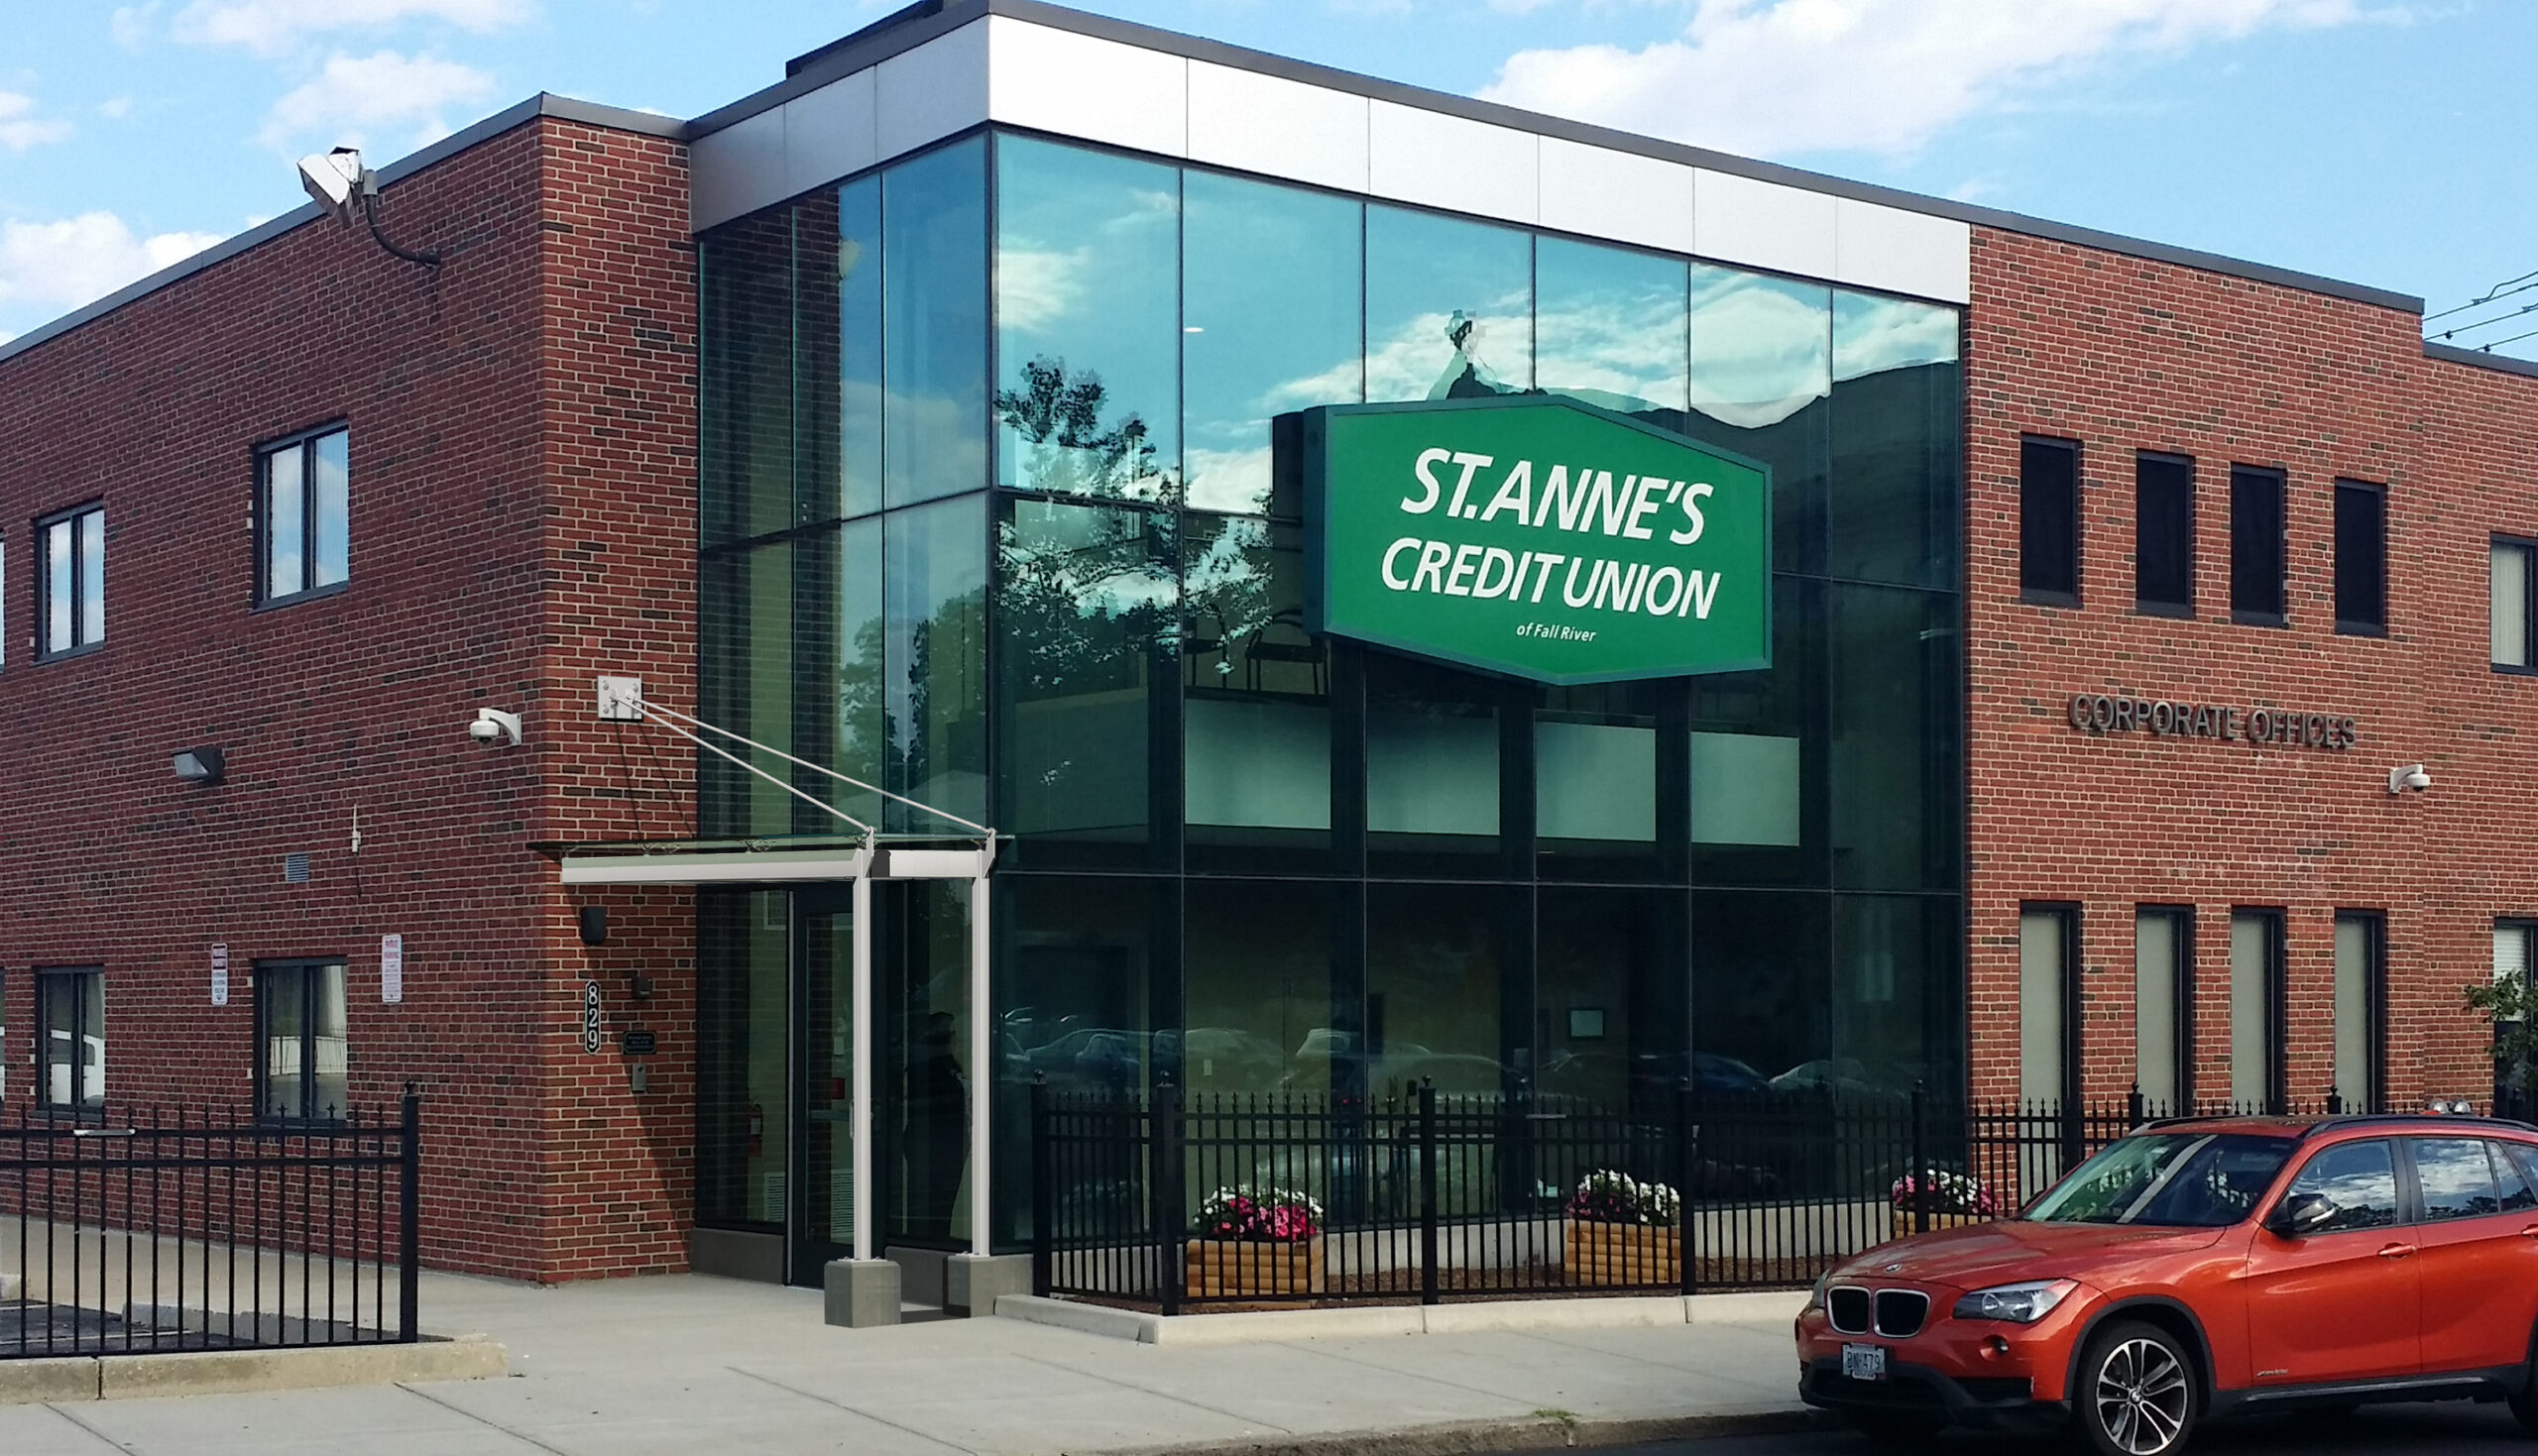 St. Anne’s Credit Union – Oliver Street